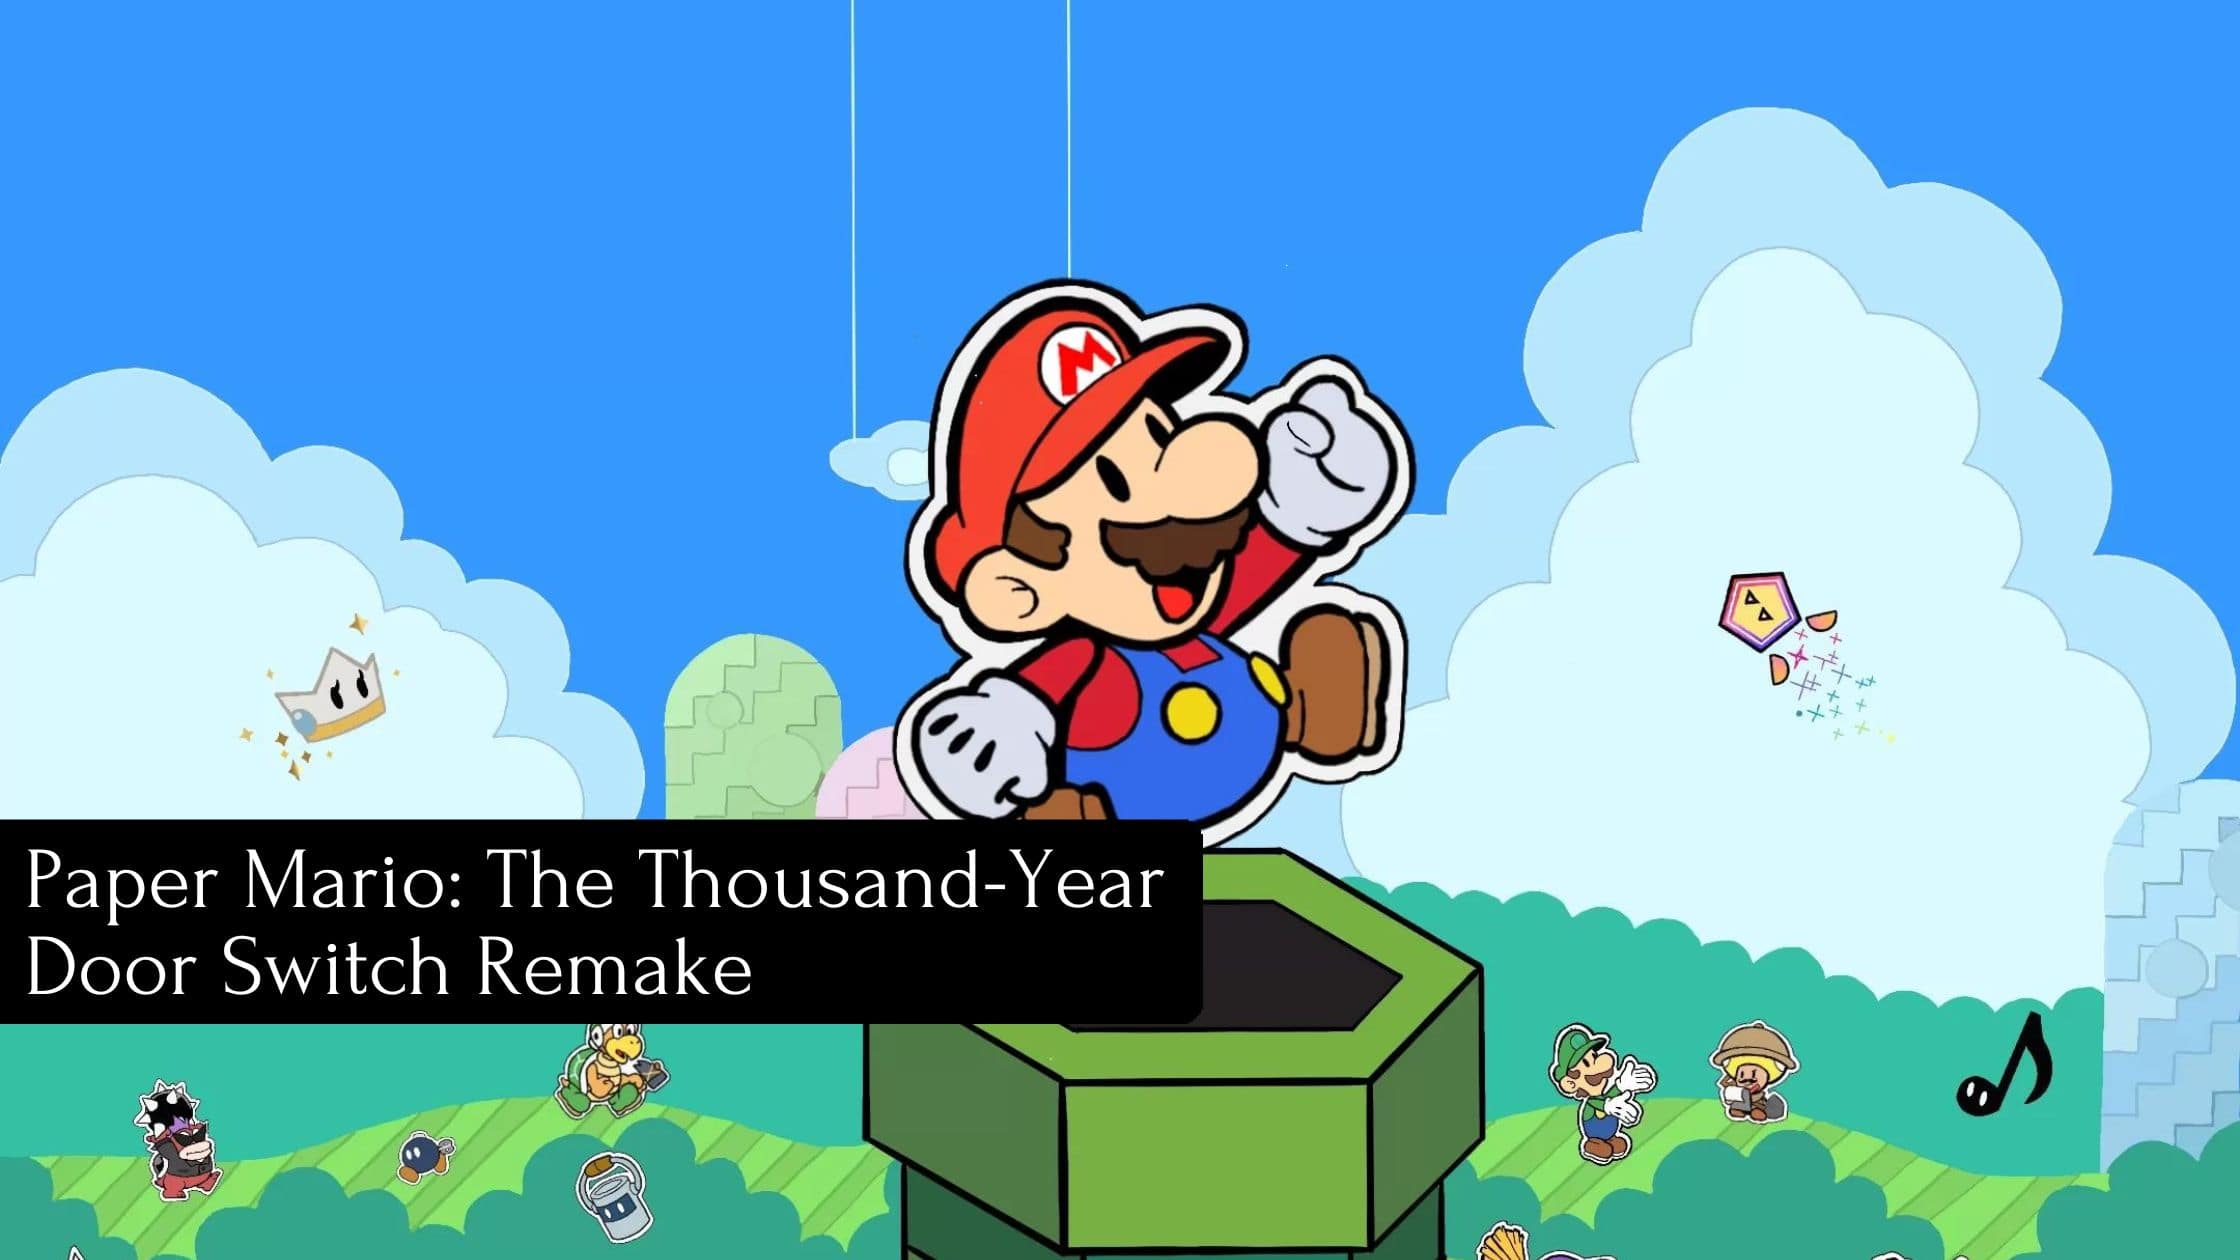 Paper Mario: The Thousand-Year Door Switch Remake